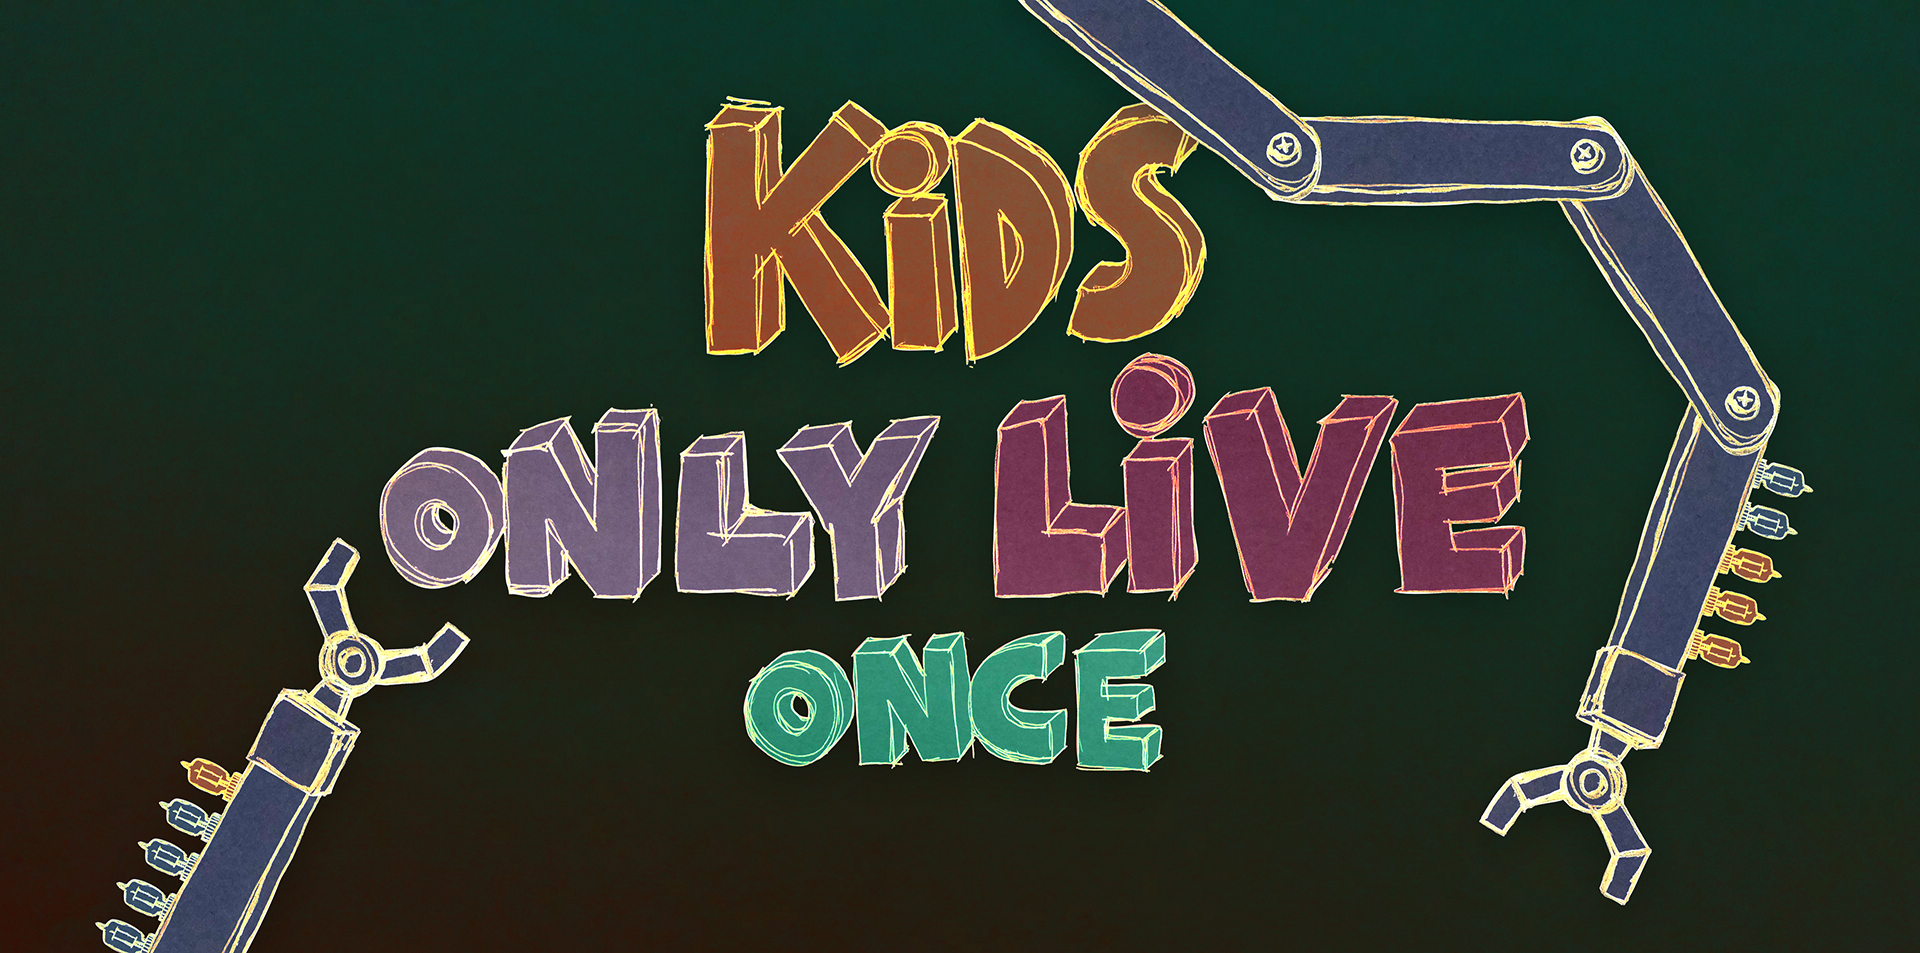 Kids Only Live Once